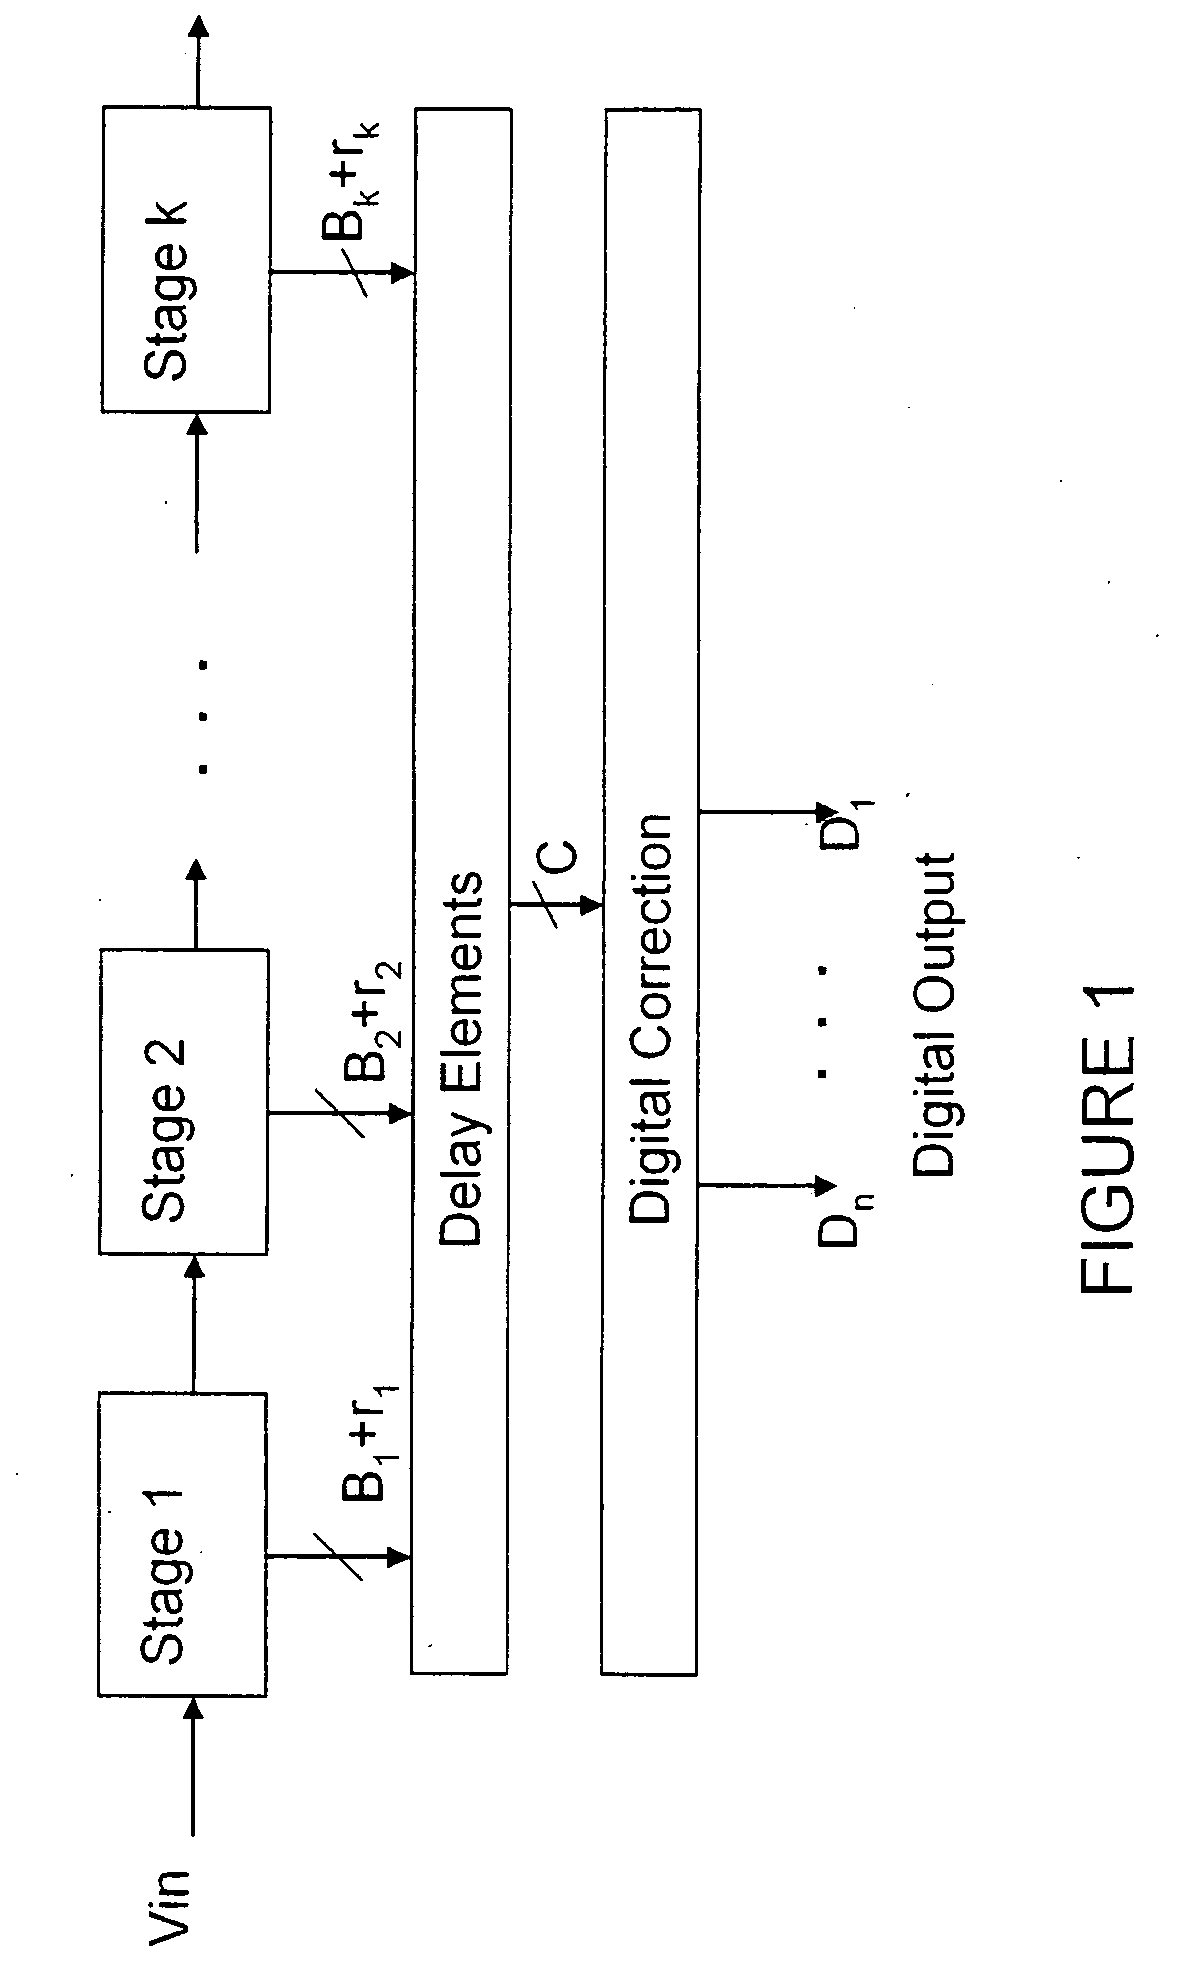 Analog-to-digital converter without track-and-hold